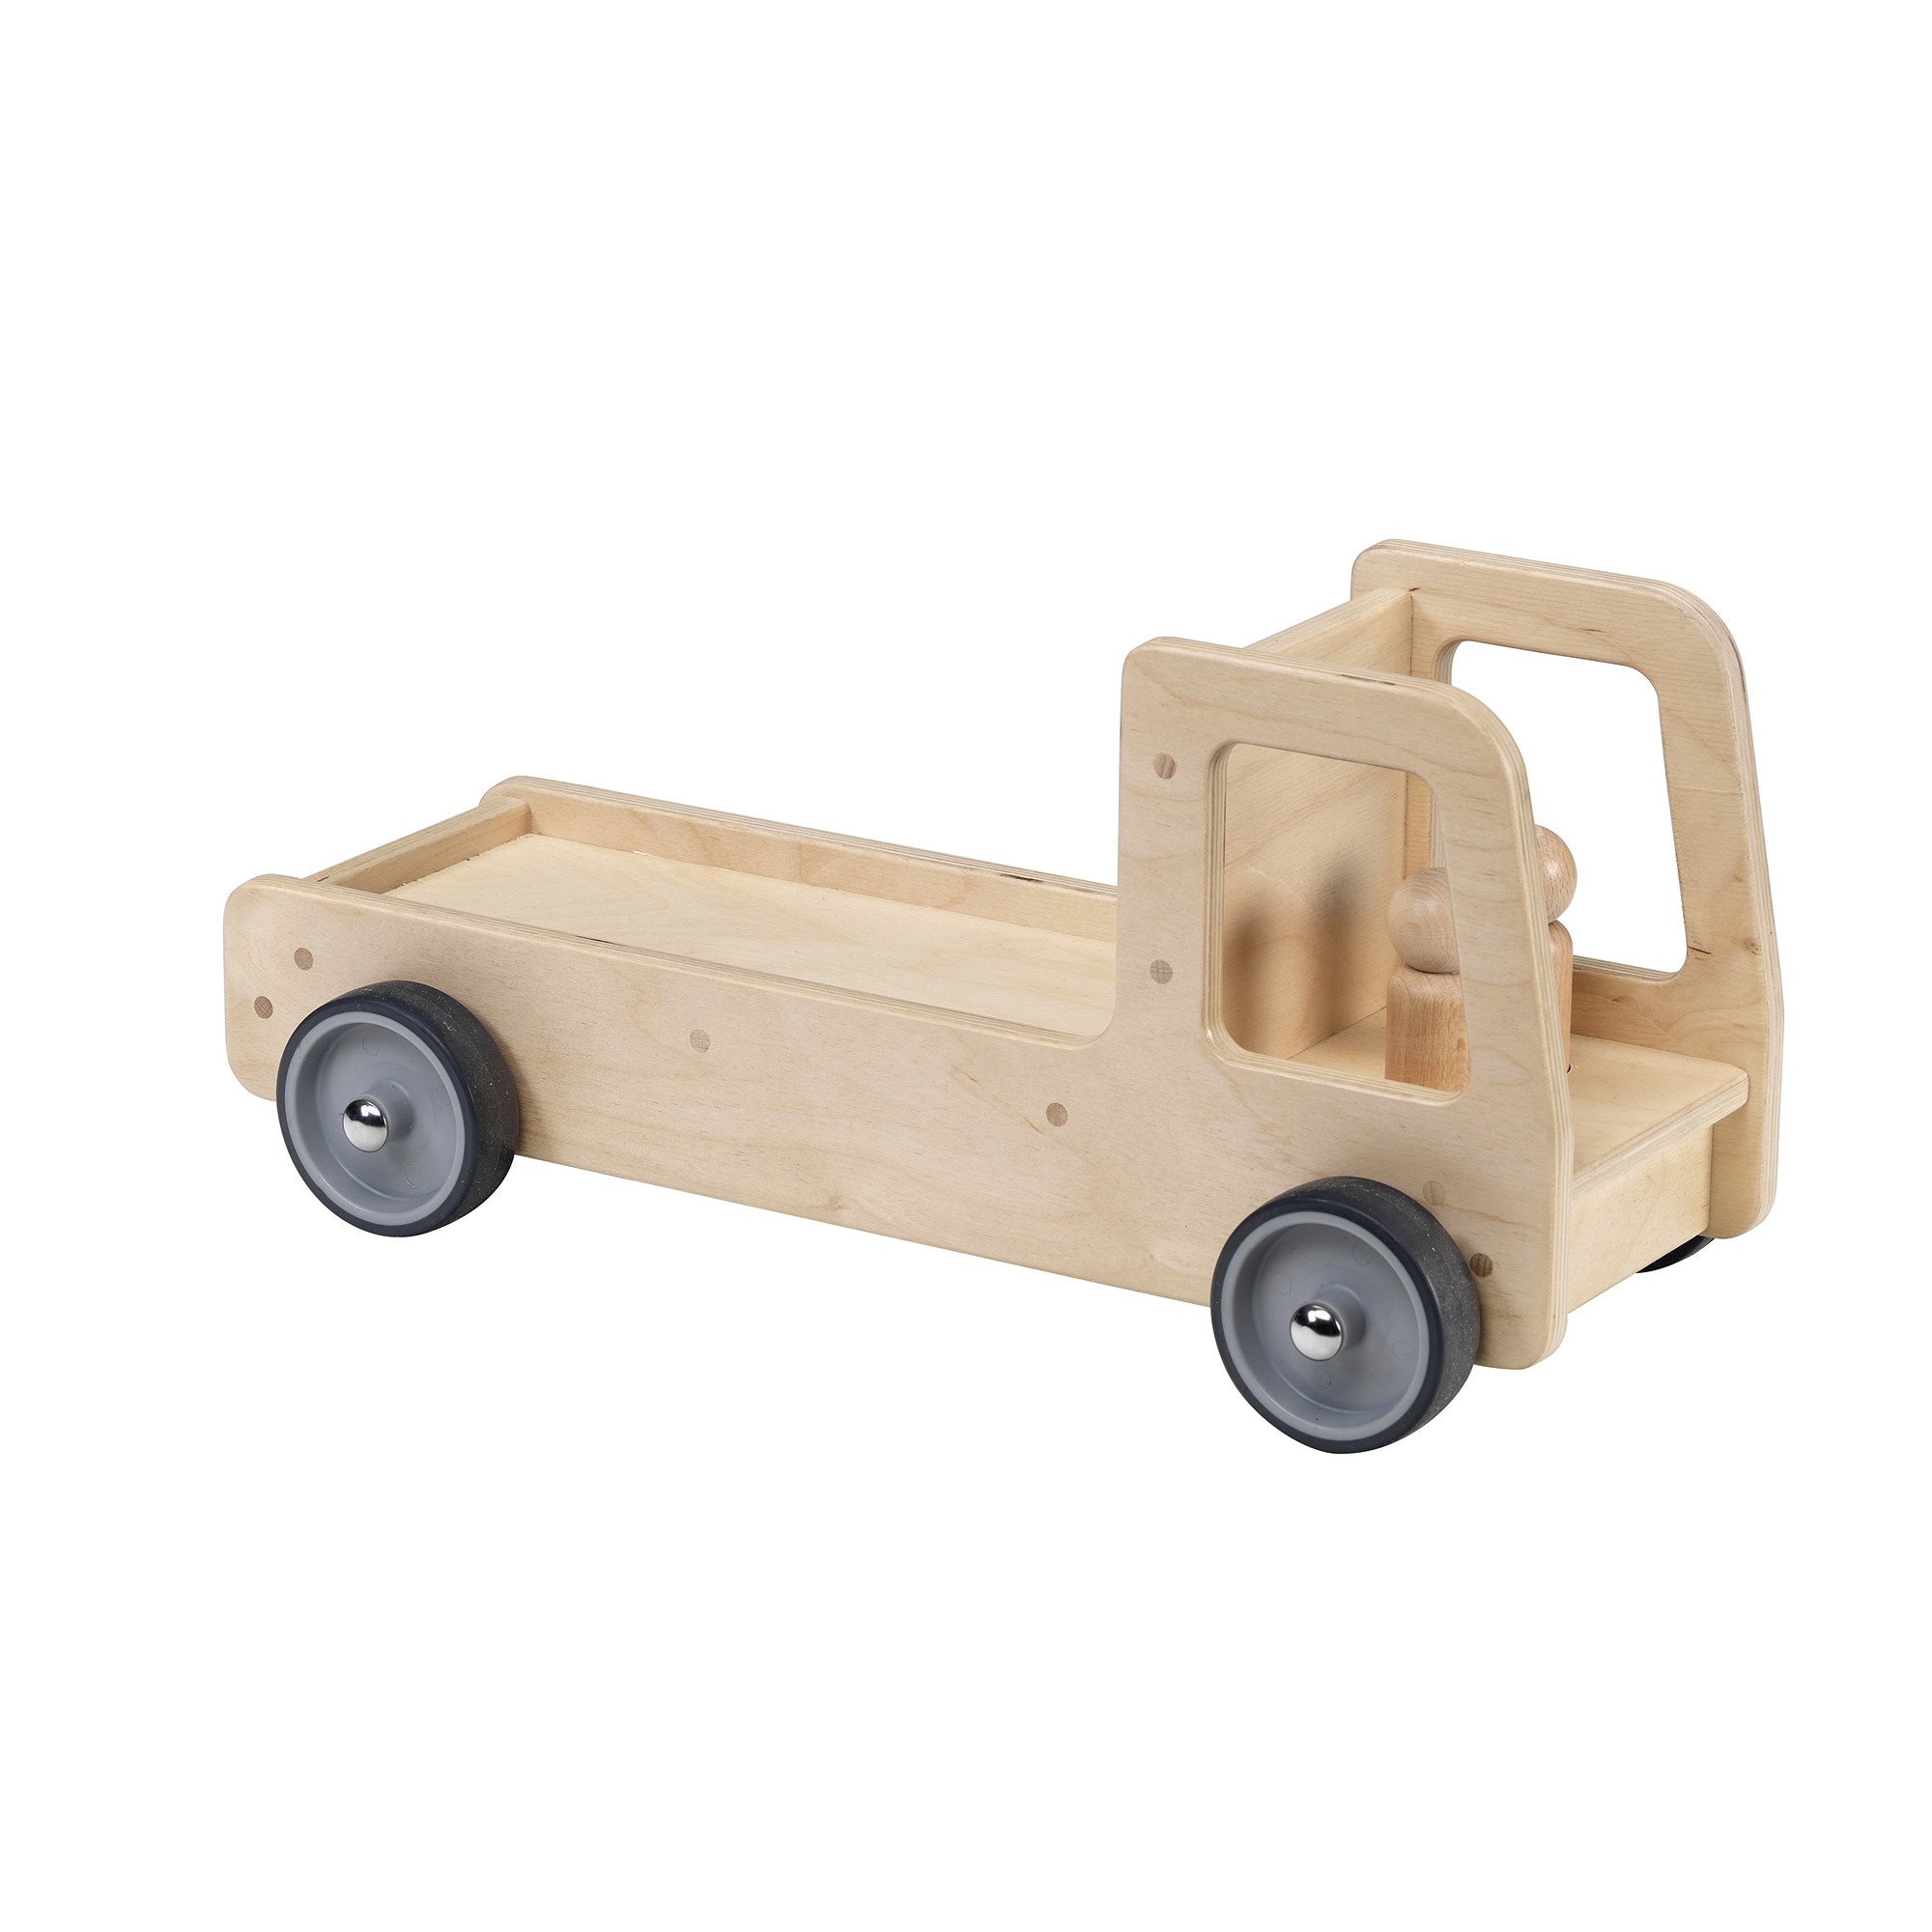 Giant Wooden Flat Bed Truck